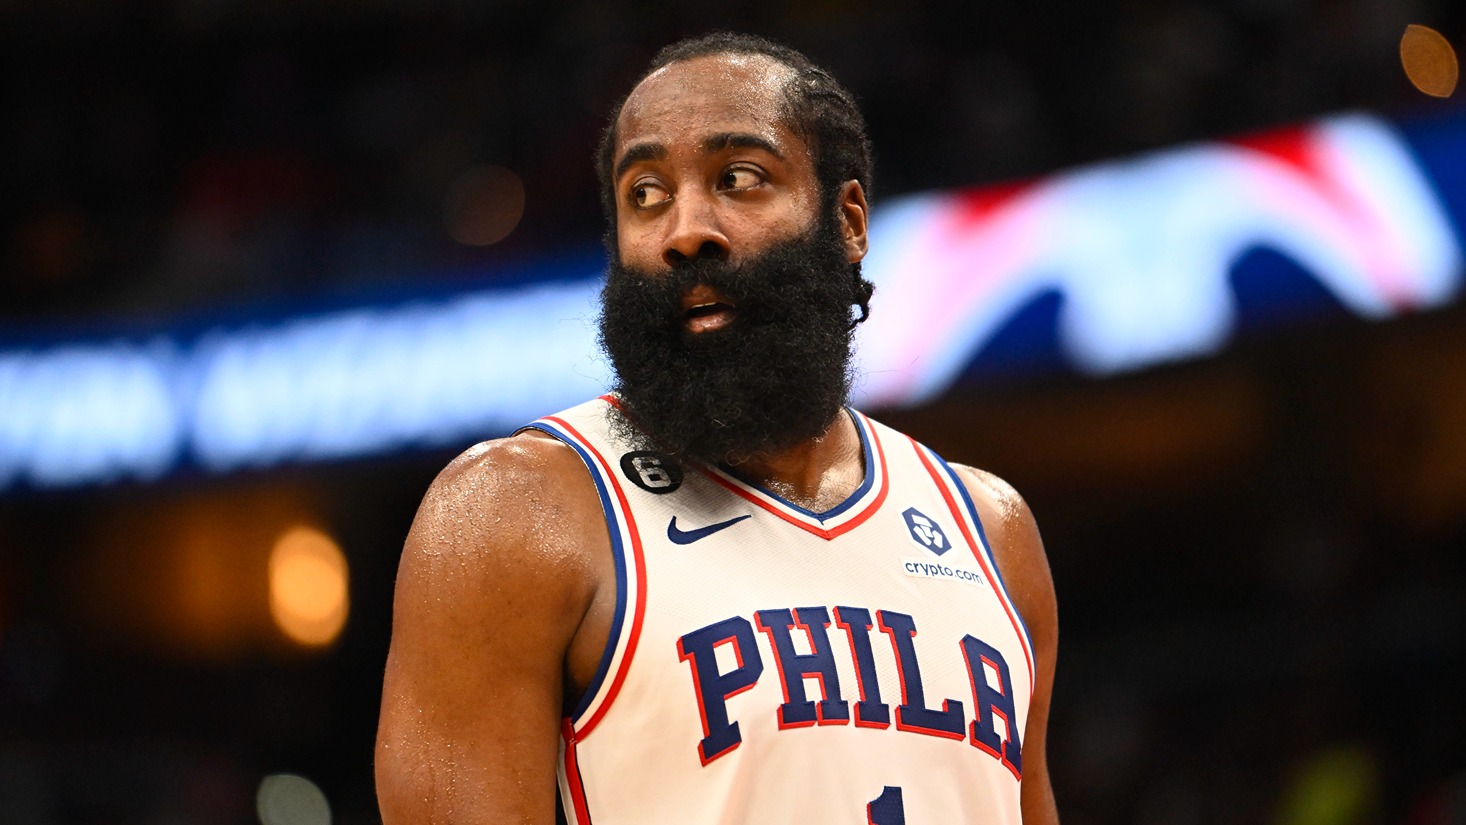 Look: James Harden went with a bold outfit before Game 1